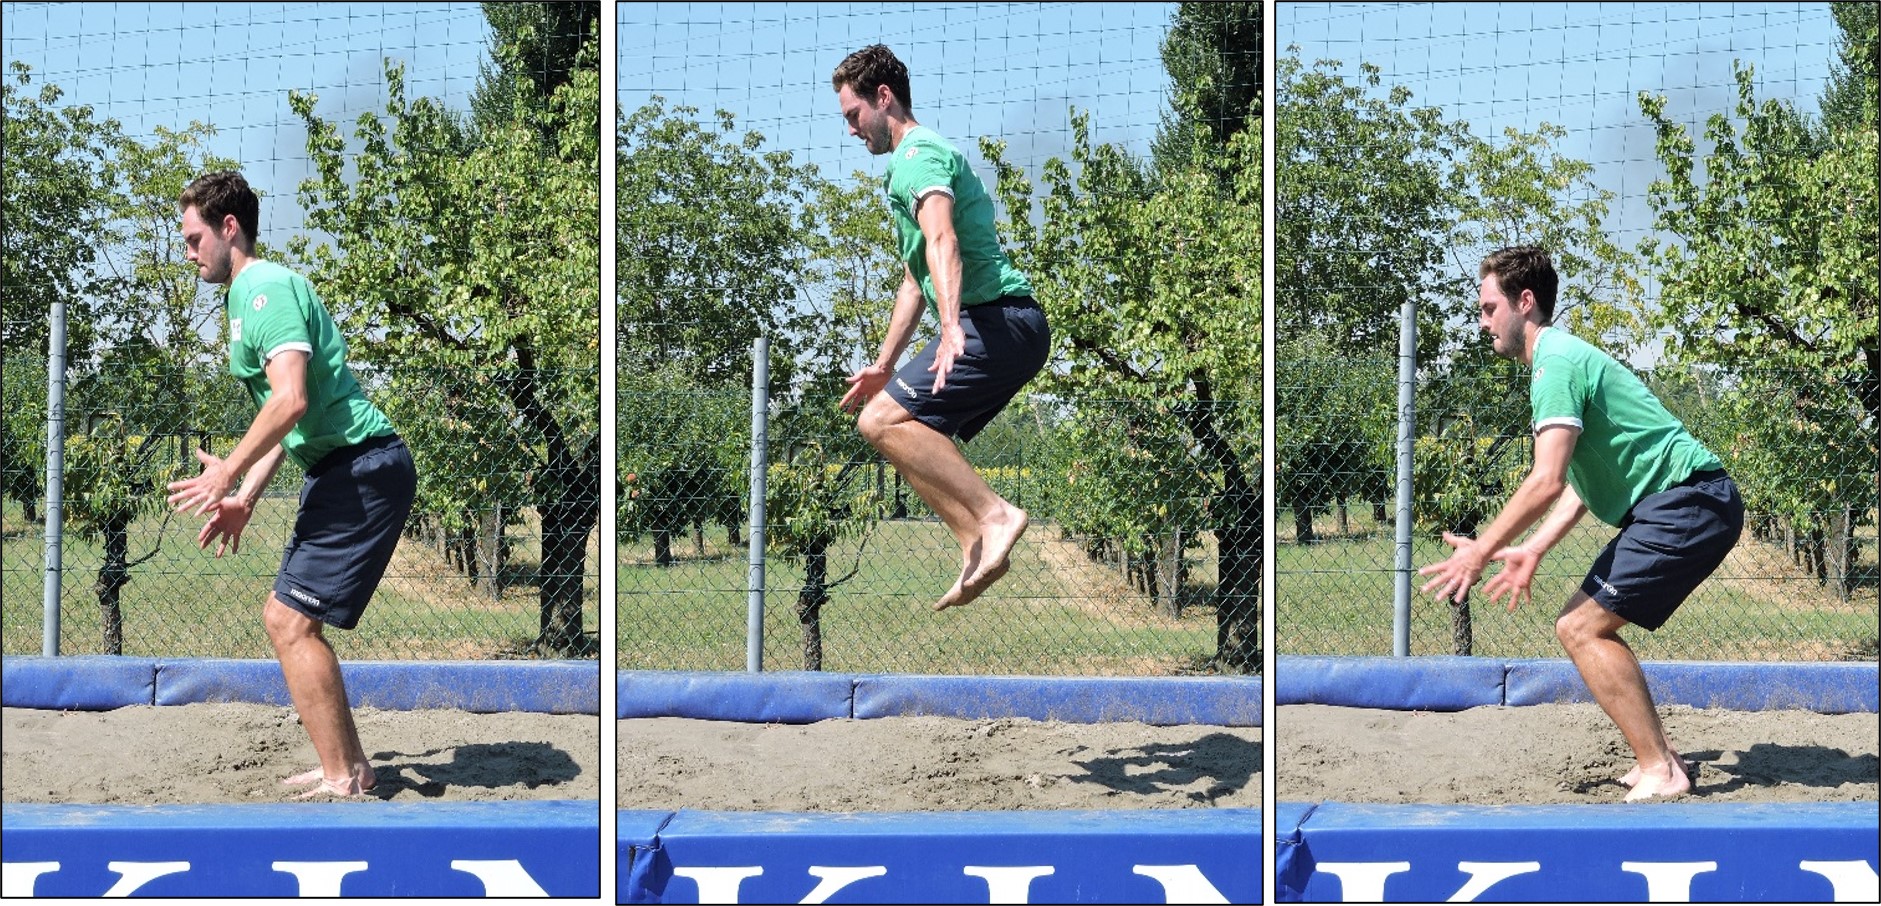 How to Safely Land a Jump During Sports